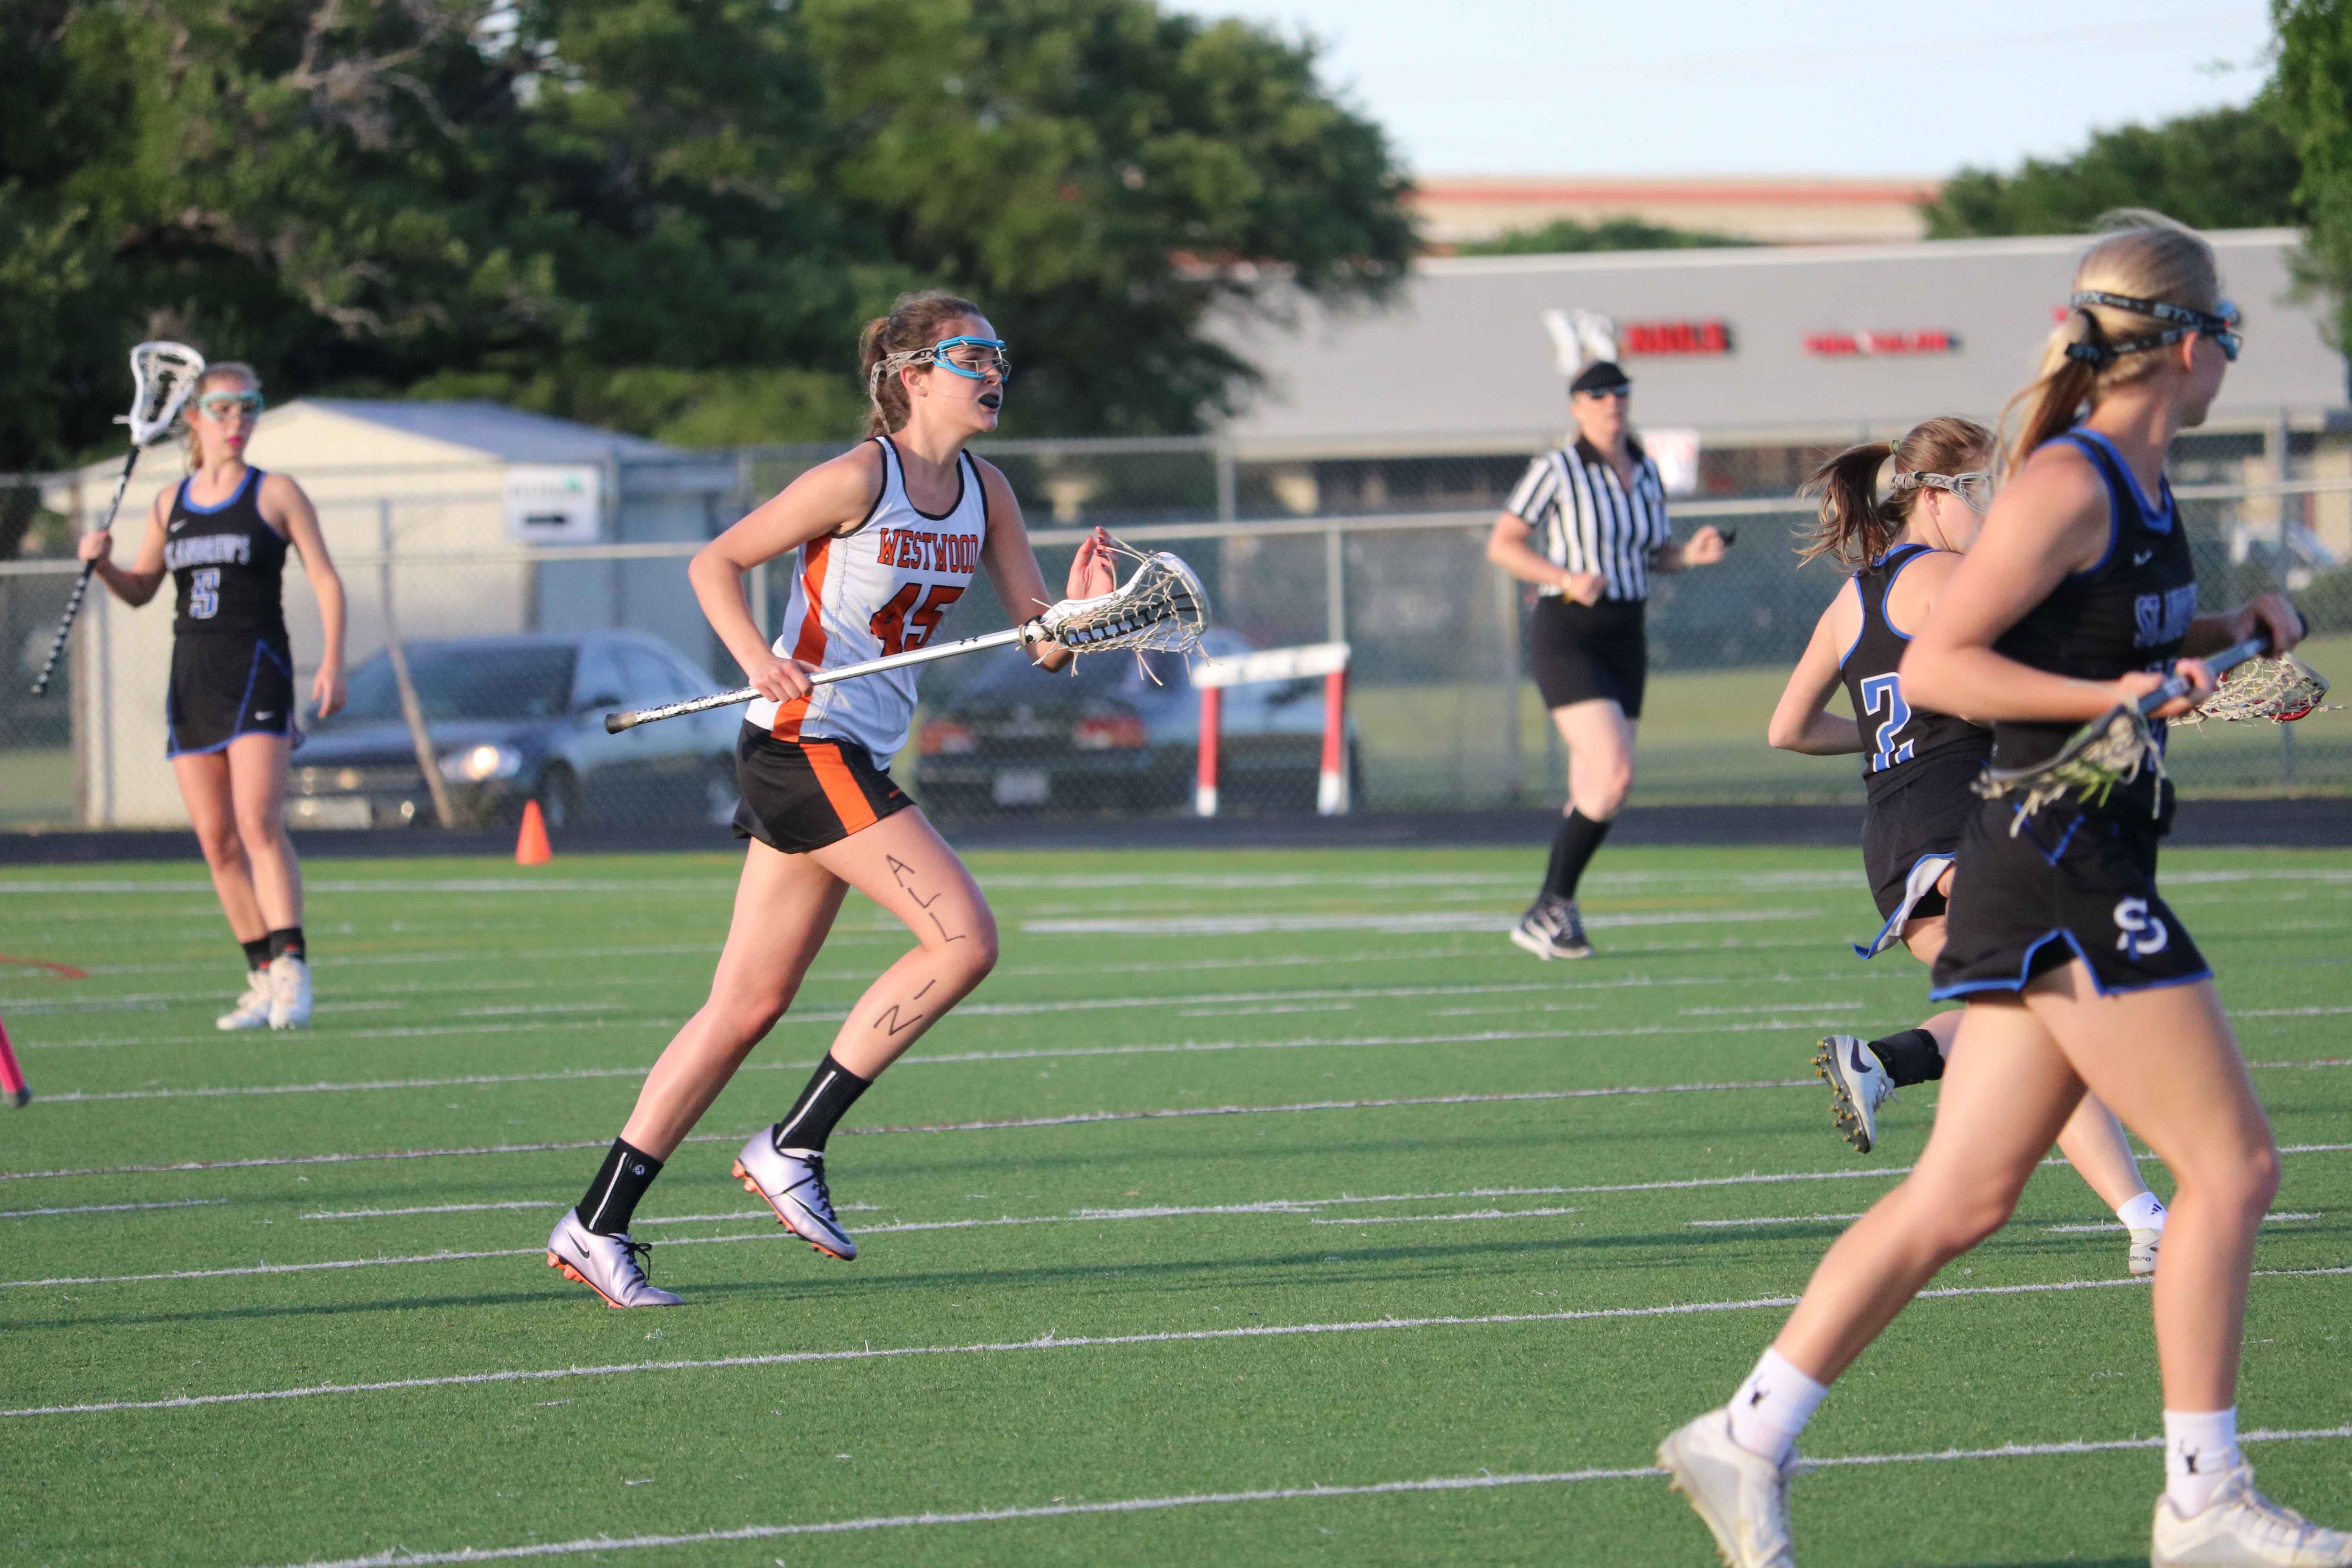 GALLERY%3A+Varsity+Girls+Lacrosse+Finishes+Up+Short+Against+St.+Andrews